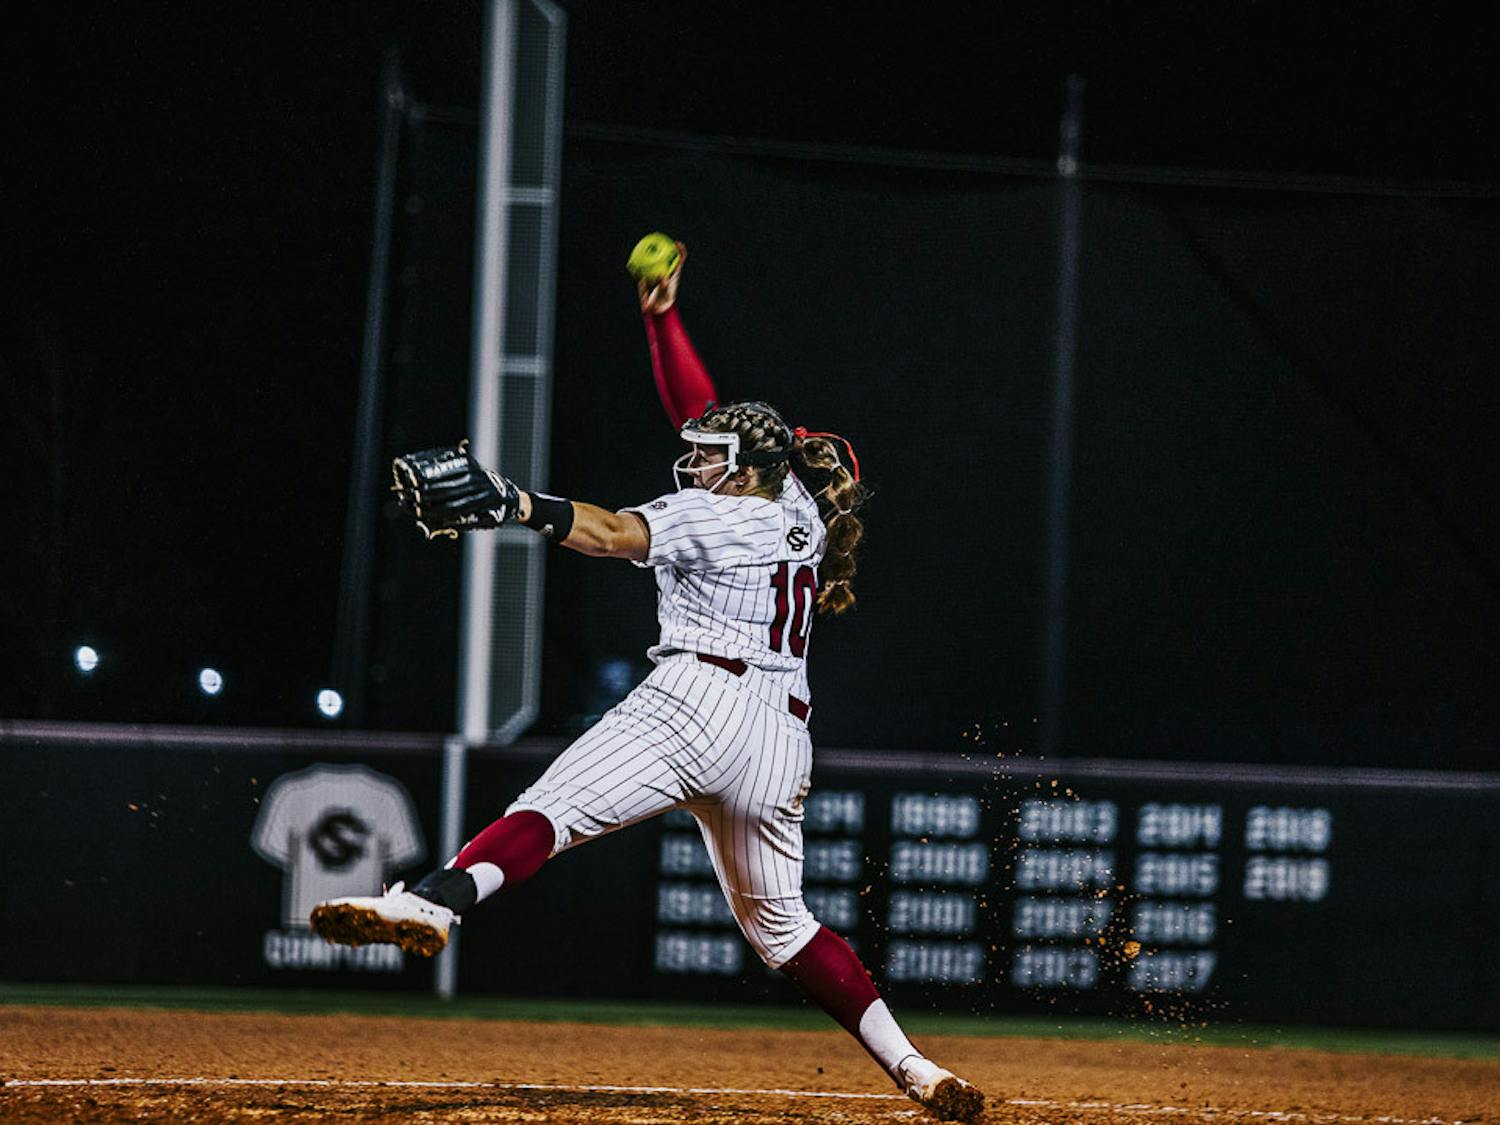 Senior pitcher Bailey Betenbaugh winds up to throw her first pitch of the home opener against the College of Charleston at Carolina Softball Stadium at Beckham Field on February 15, 2023. The Gamecocks beat the Cougars 8-0.&nbsp;